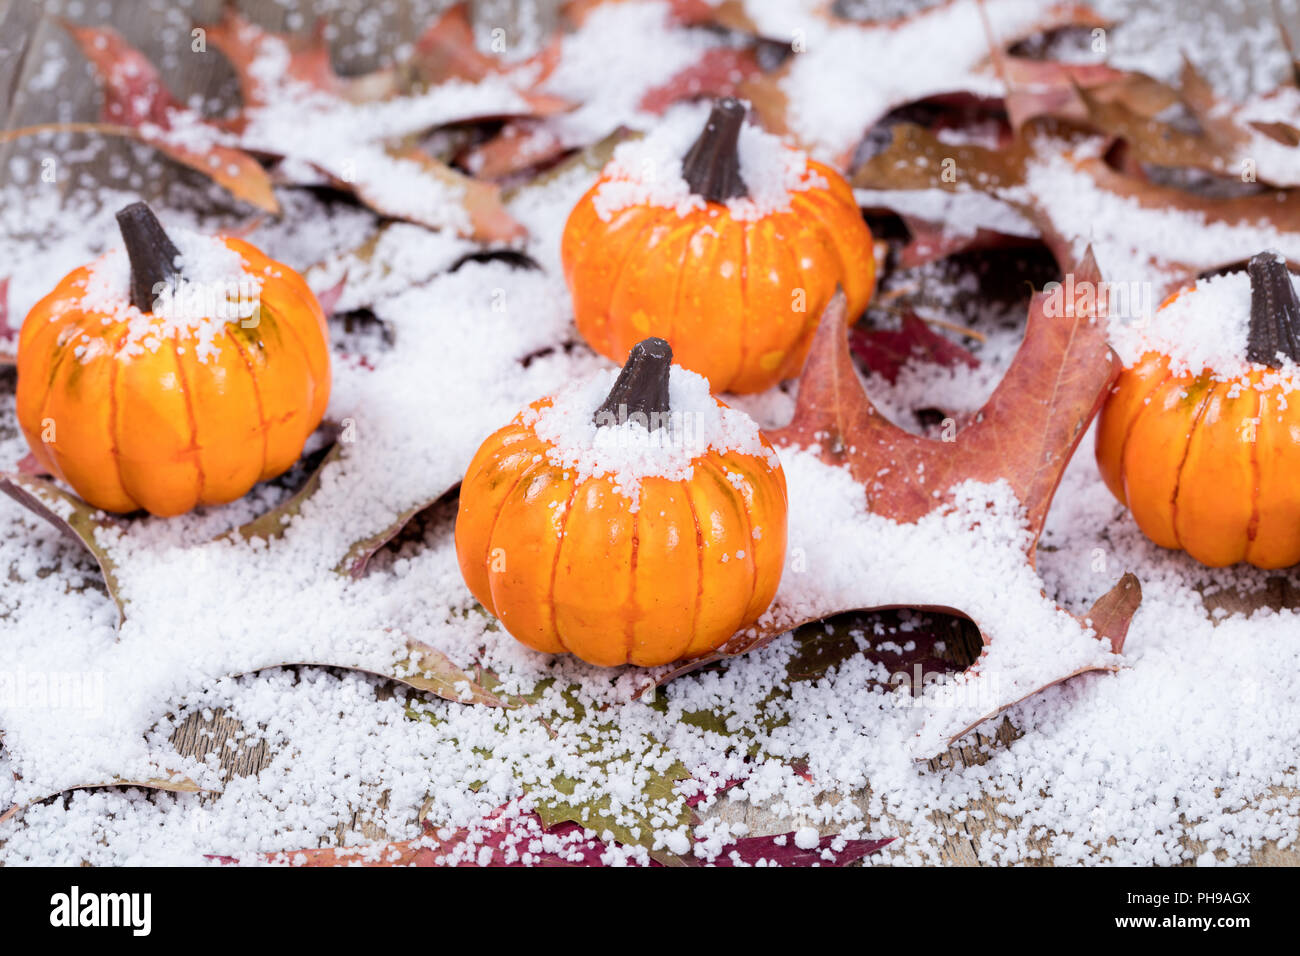 Early snow with autumn pumpkins and leaves on wood Stock Photo